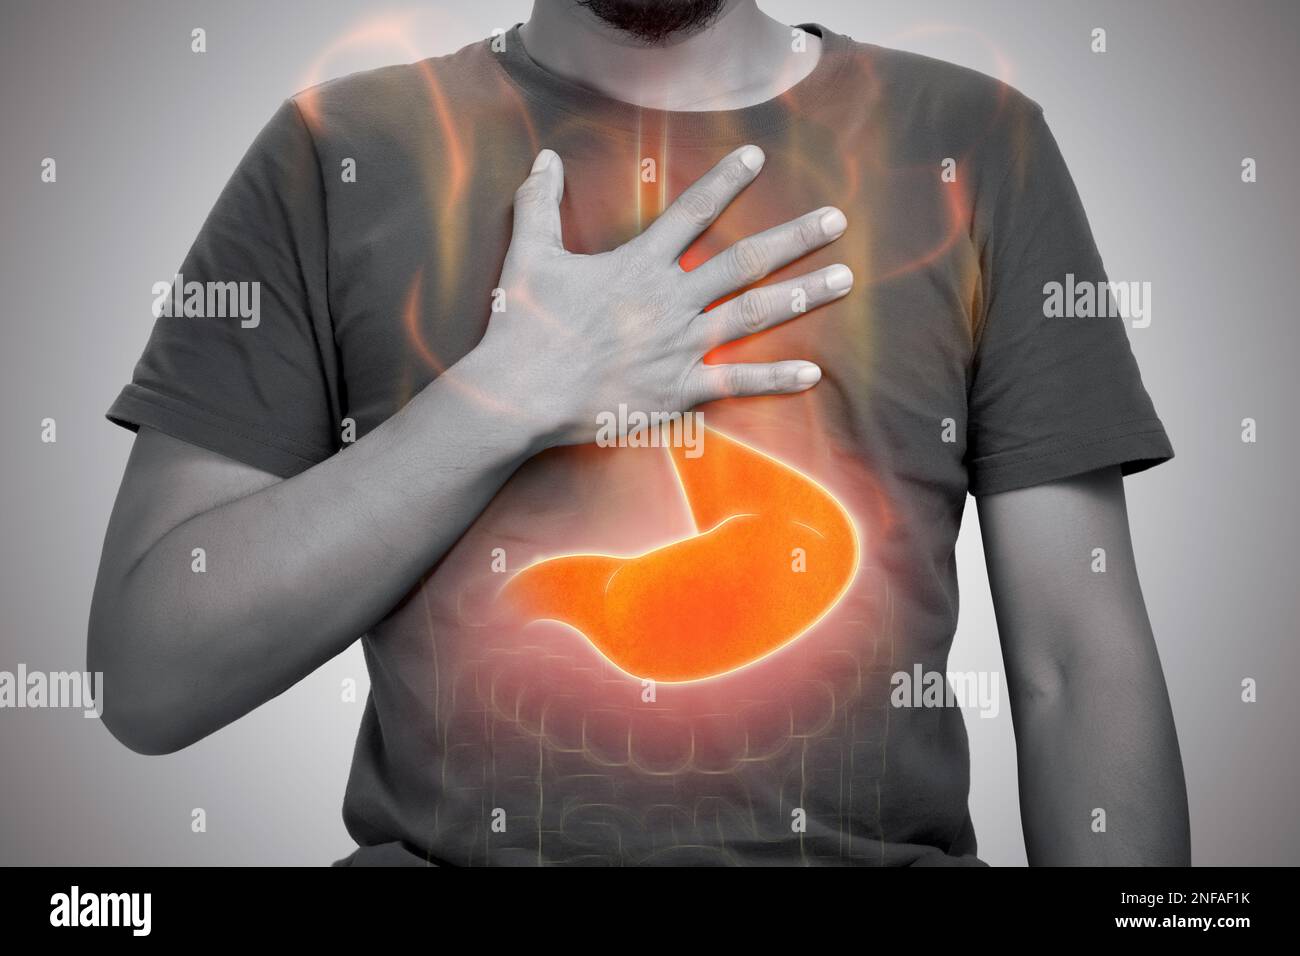 A man burning sensation in chest from acid reflux on gray background. Stock Photo